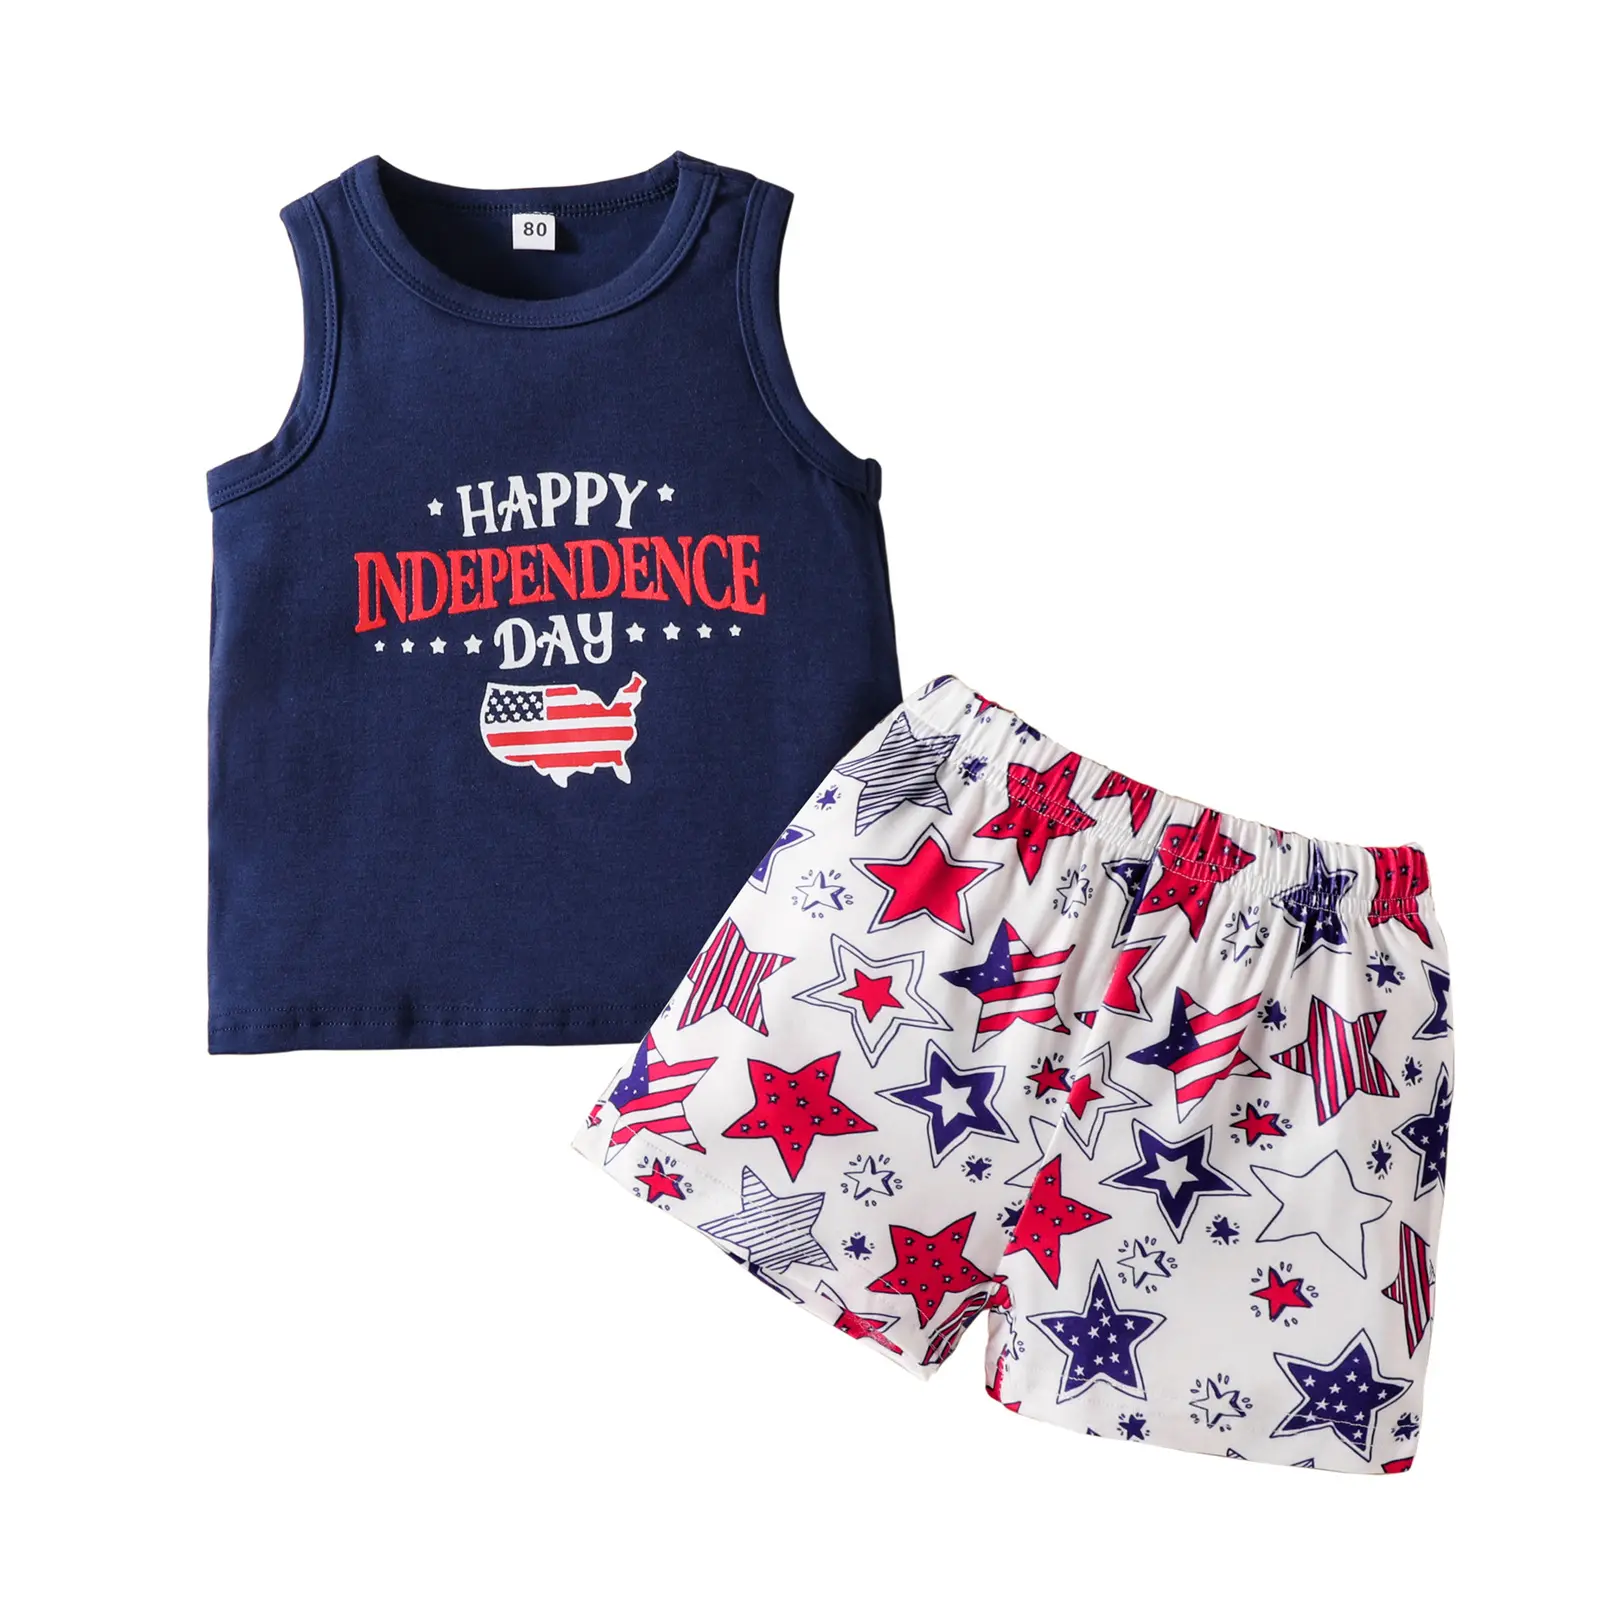 New Arrivals Kids' Summer Vest Sleeveless Clothing Set American Independence Day Baby Boys' Clothing Sets 2 Piece Set